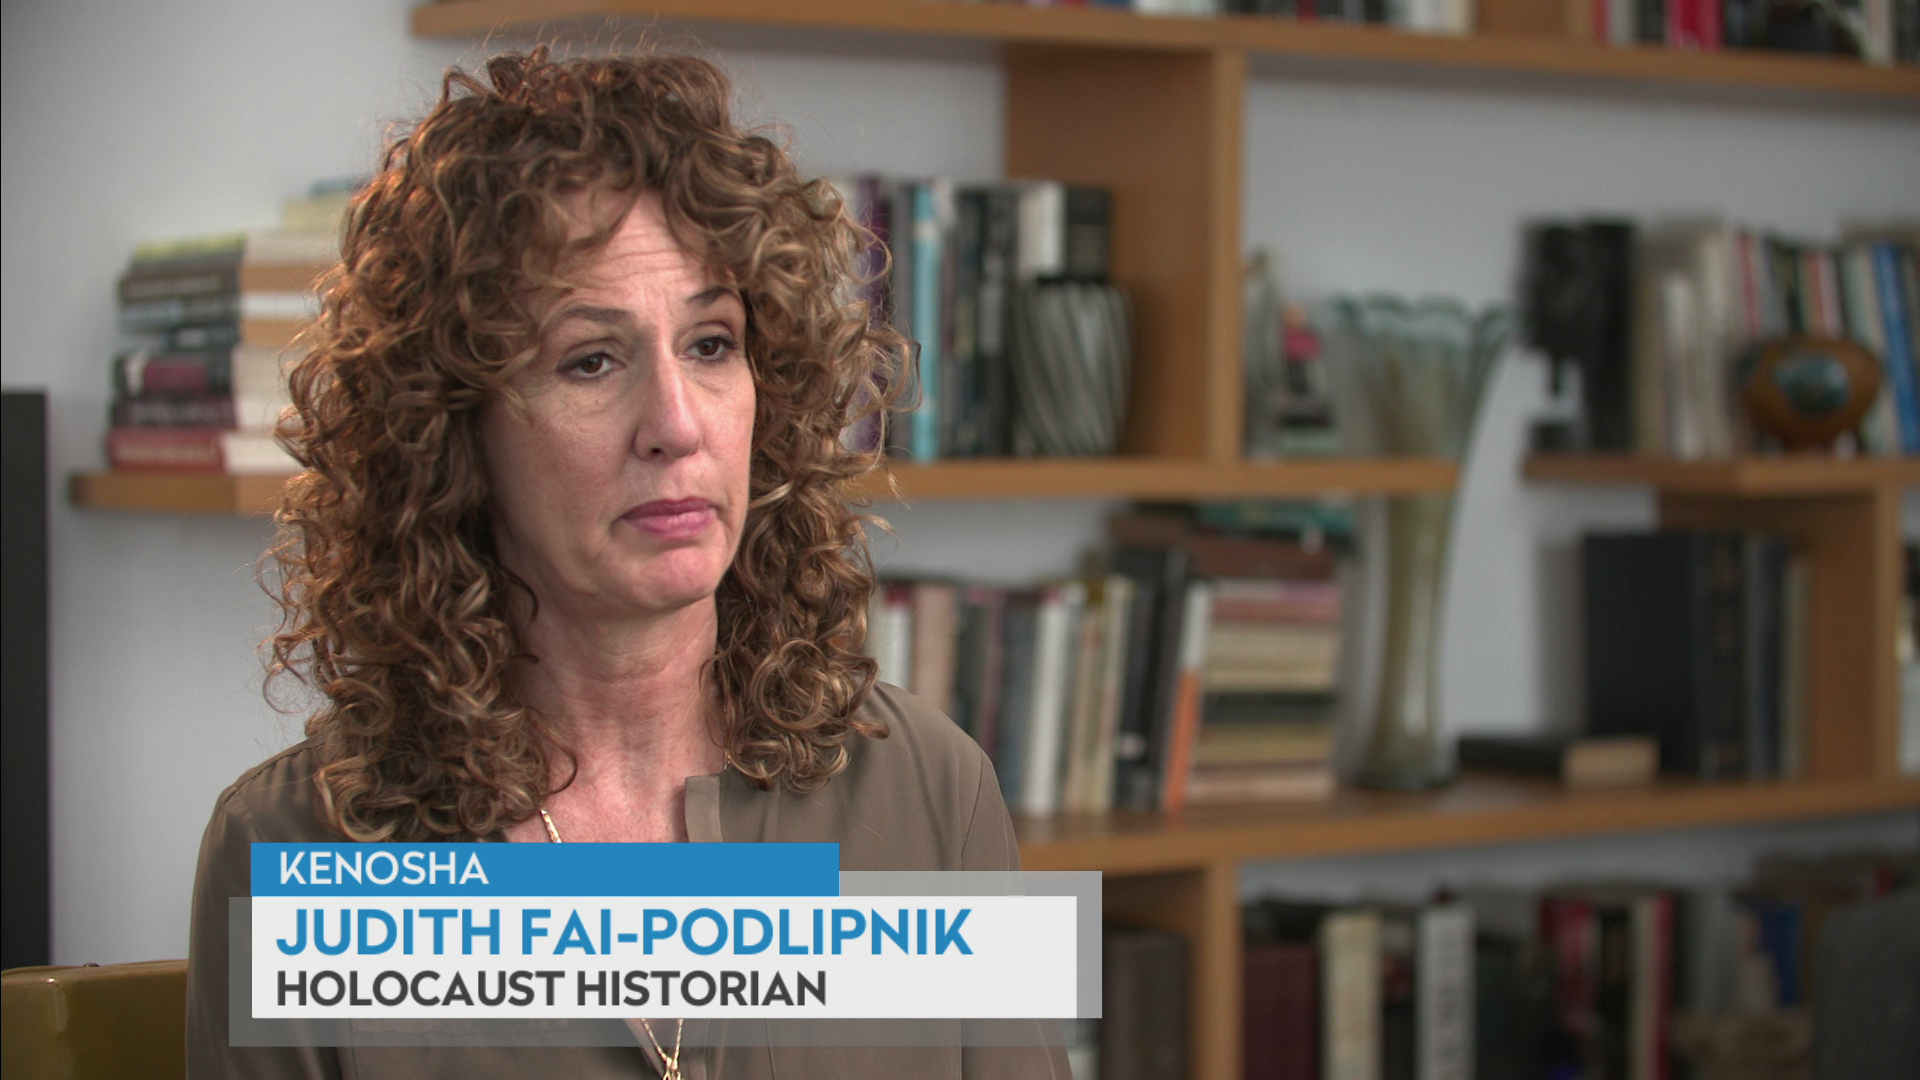 A still image from a video interview shows Judith Fai-Podlipnik seated in a room with sheving covered with books, pottery and other items in the background, with a graphic at bottom reading "Kenosha," "Judith Fai-Podlipnik" and "Holocaust Historian."